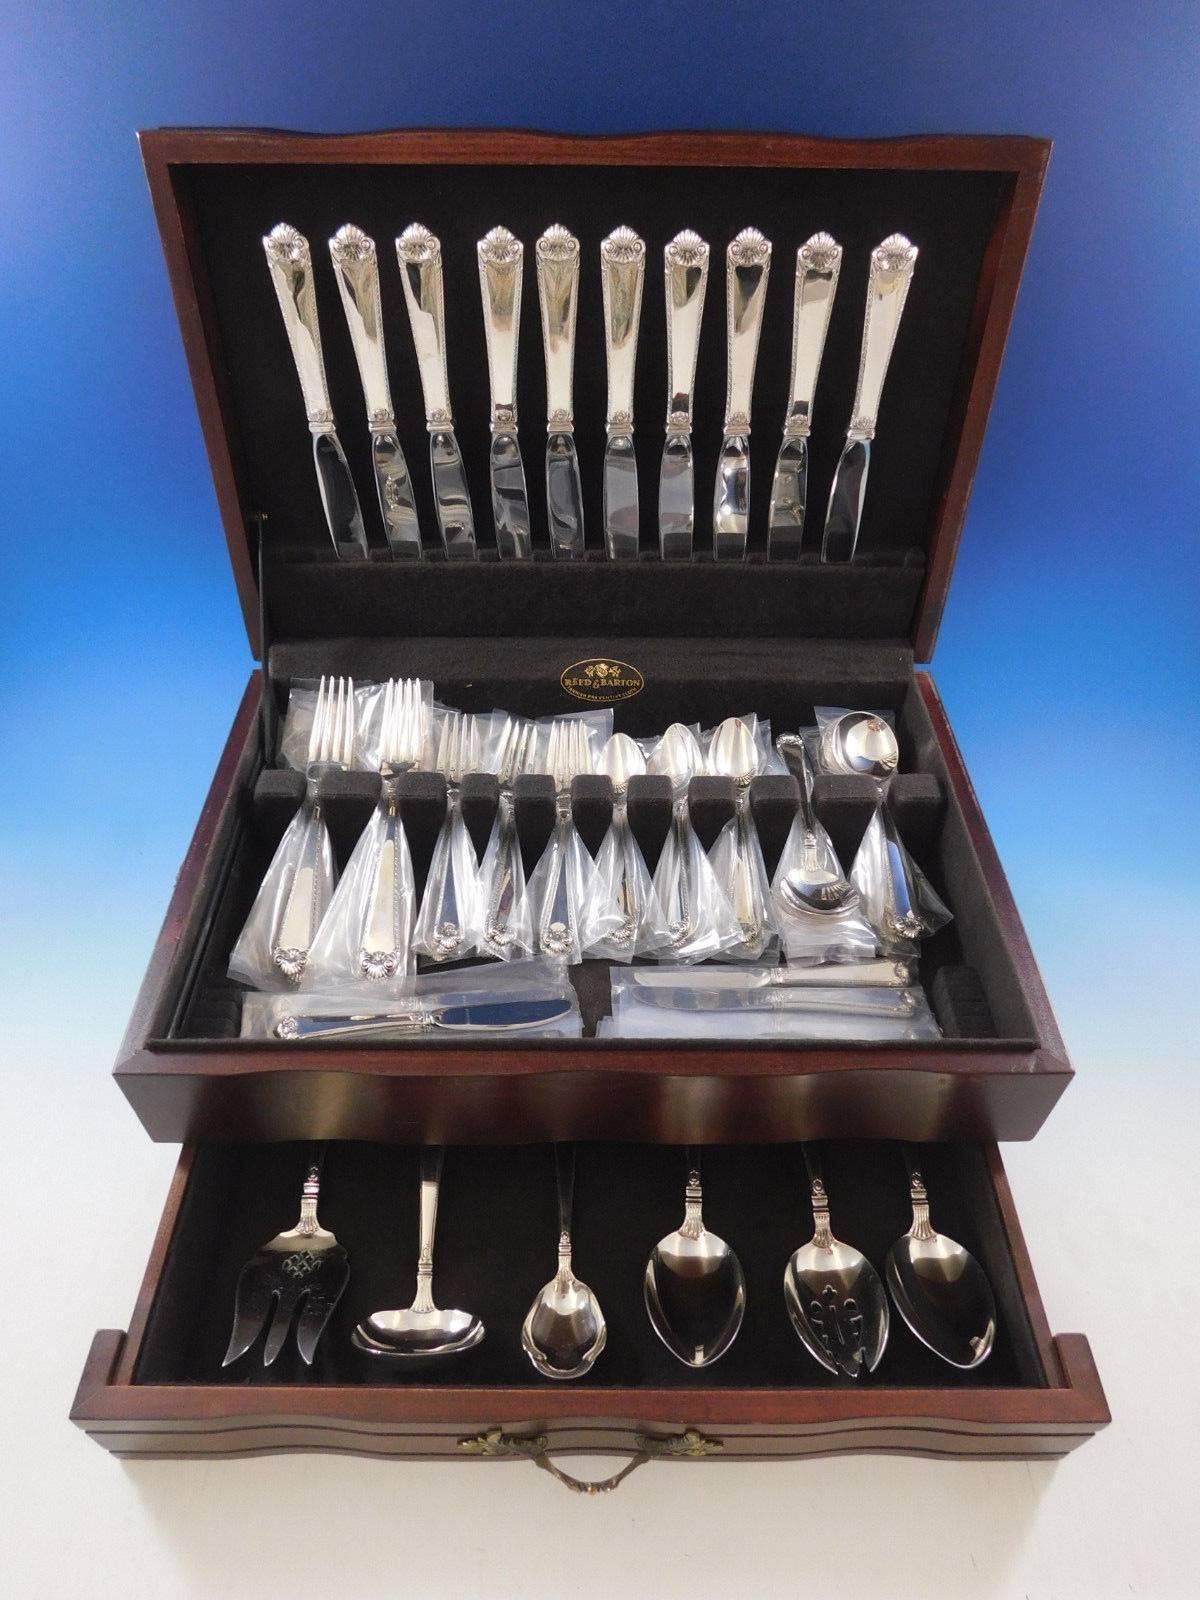 Exceptional dinner size Lamerie by Tuttle Sterling Silver Flatware set - 66 pieces. This set includes:

10 Dinner Size Knives, 9 7/8